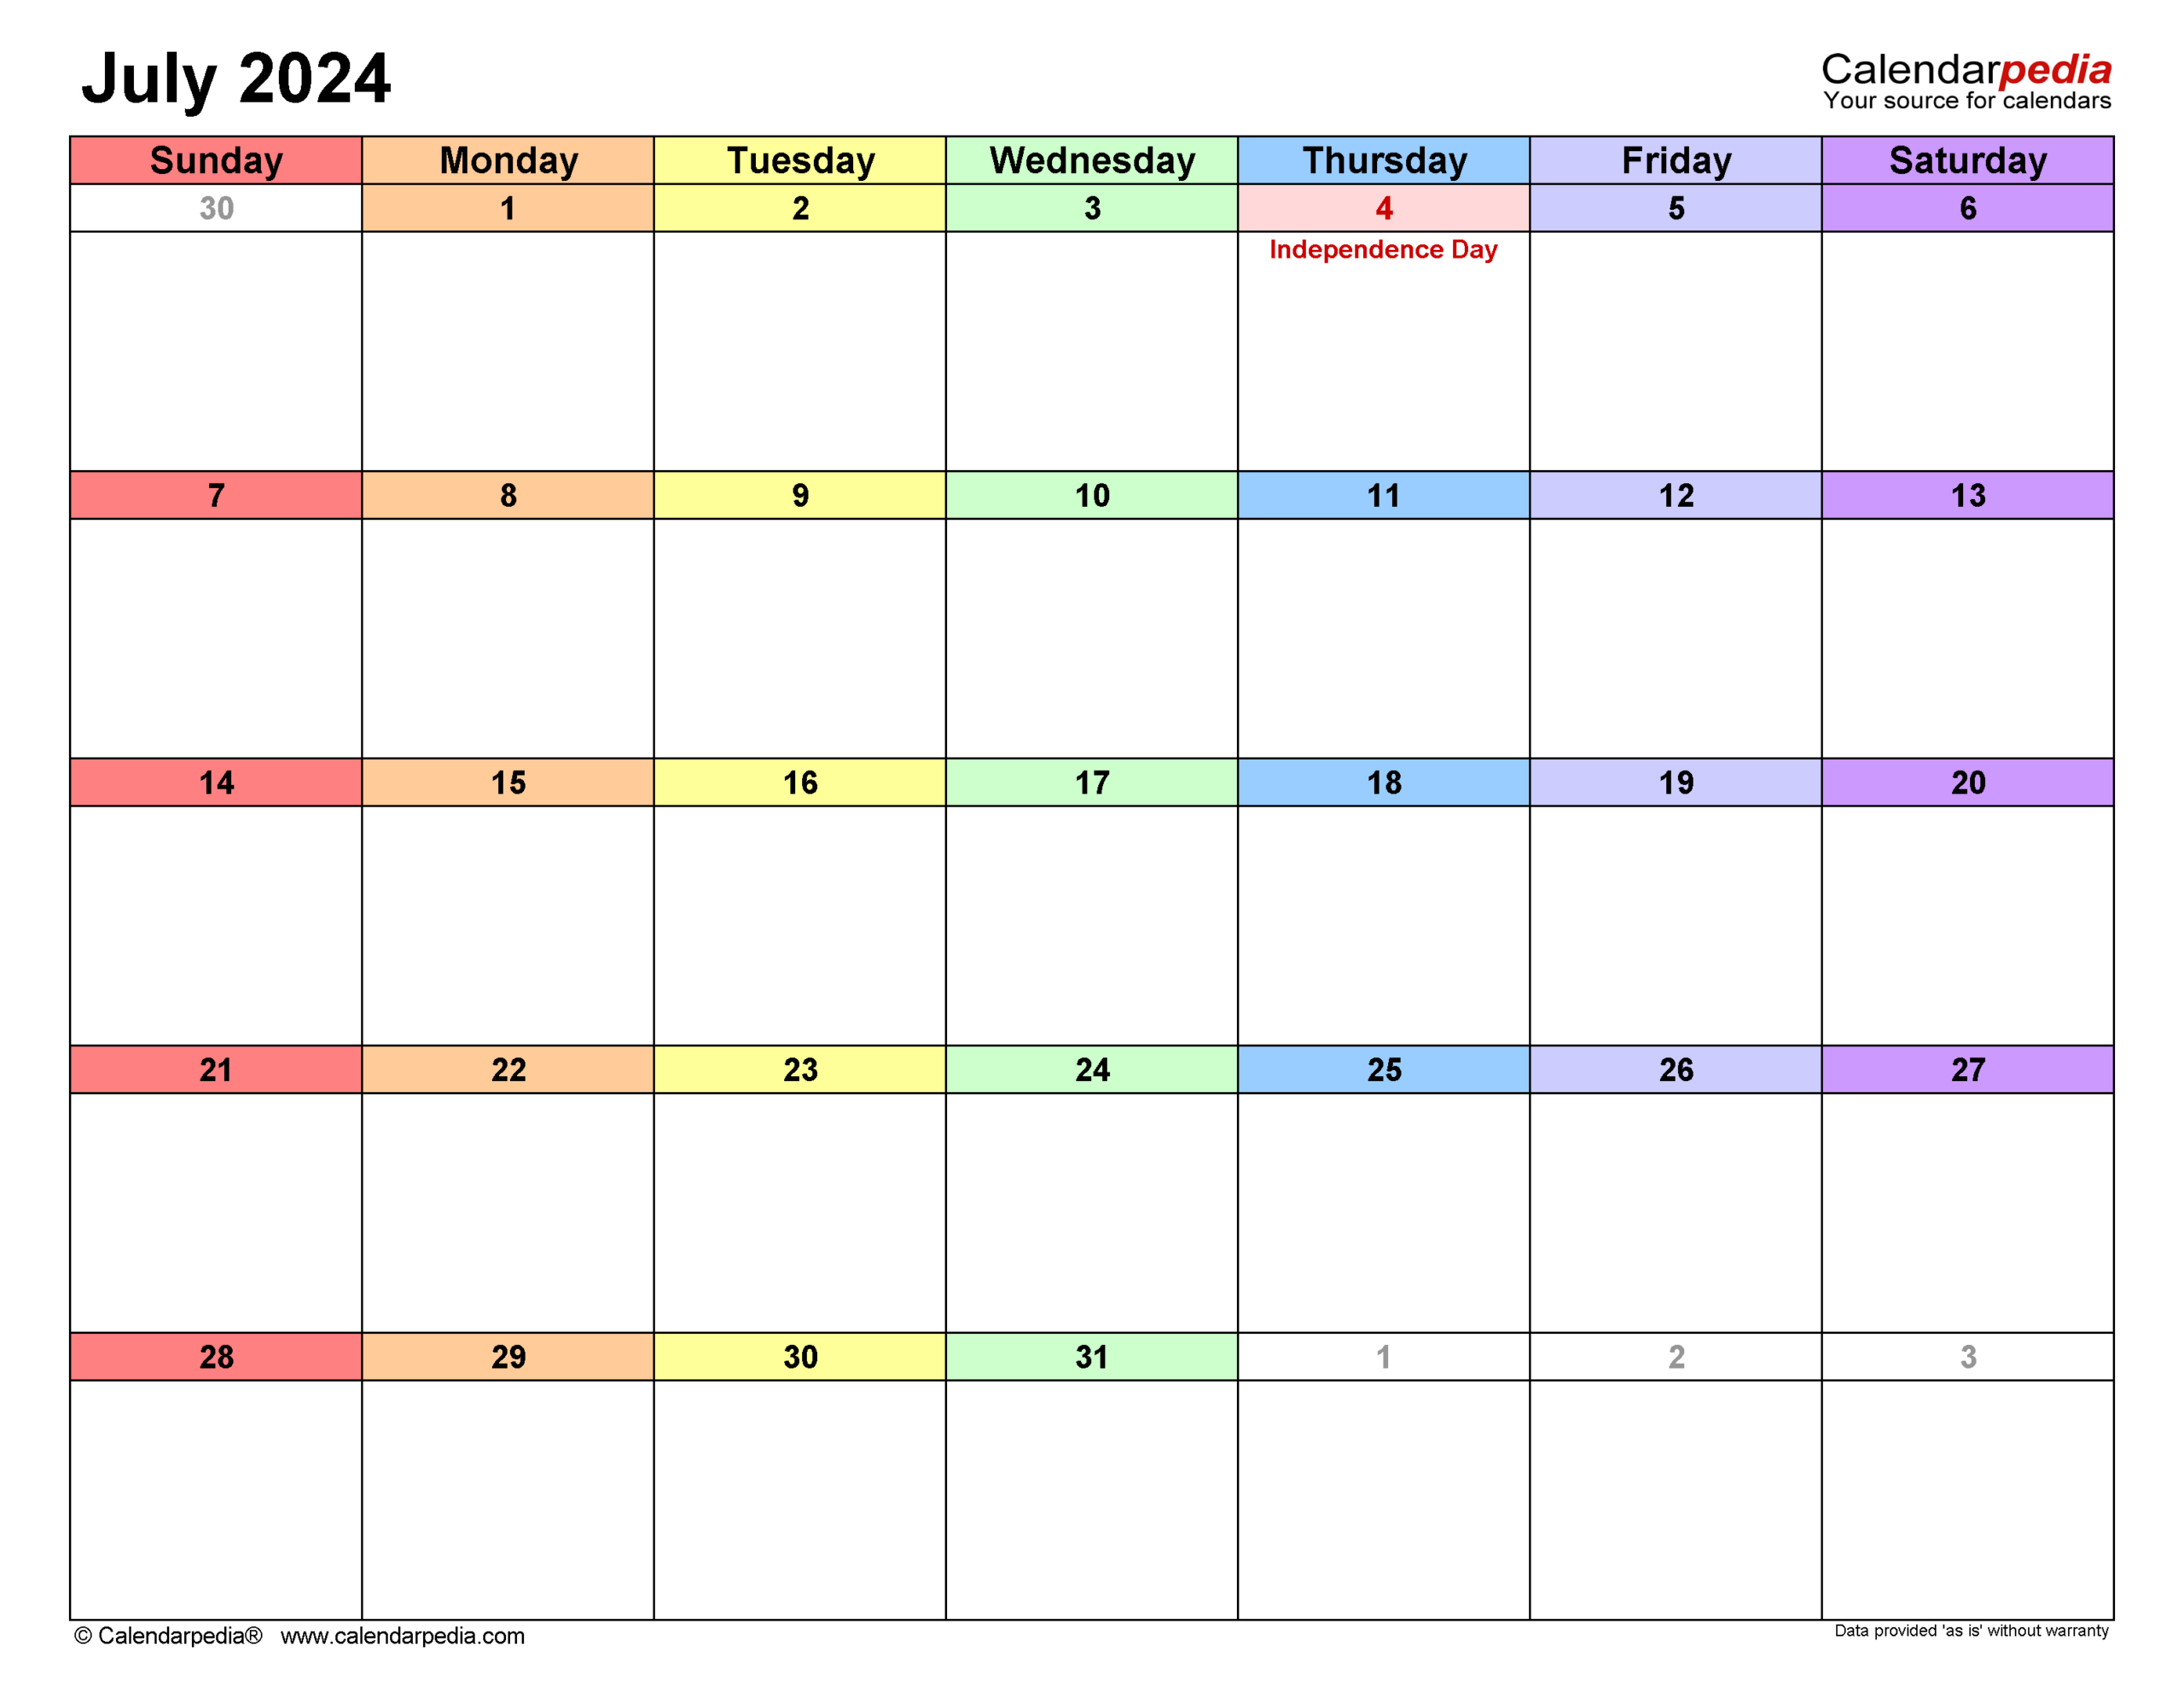 July 2024 Calendar | Templates For Word, Excel And Pdf within July 2024 Calendar Editable Word